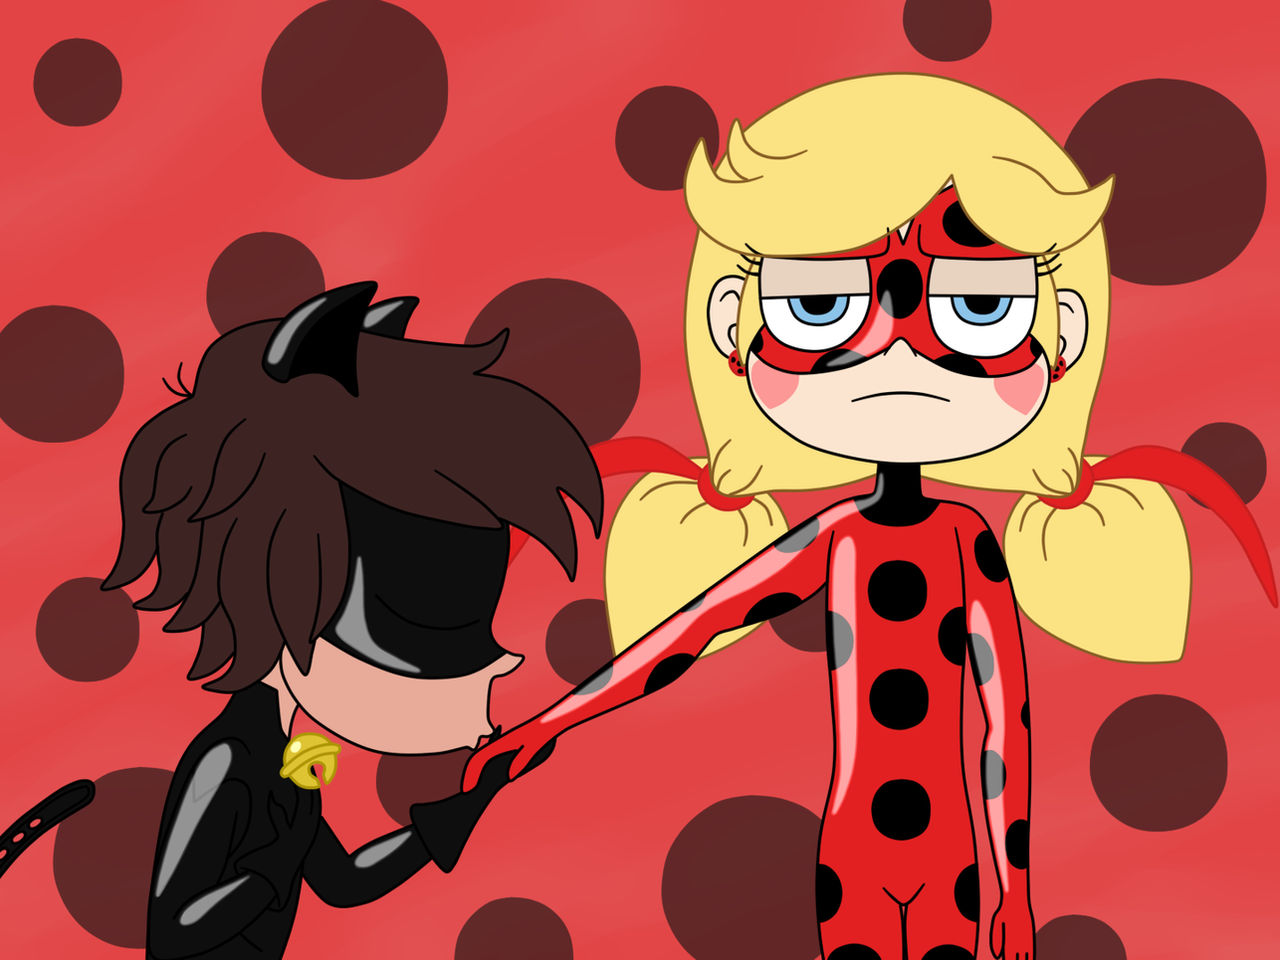 THE FATE OF THE WORLD IS IN THEIR HANDS. Miraculous: Ladybug & Cat